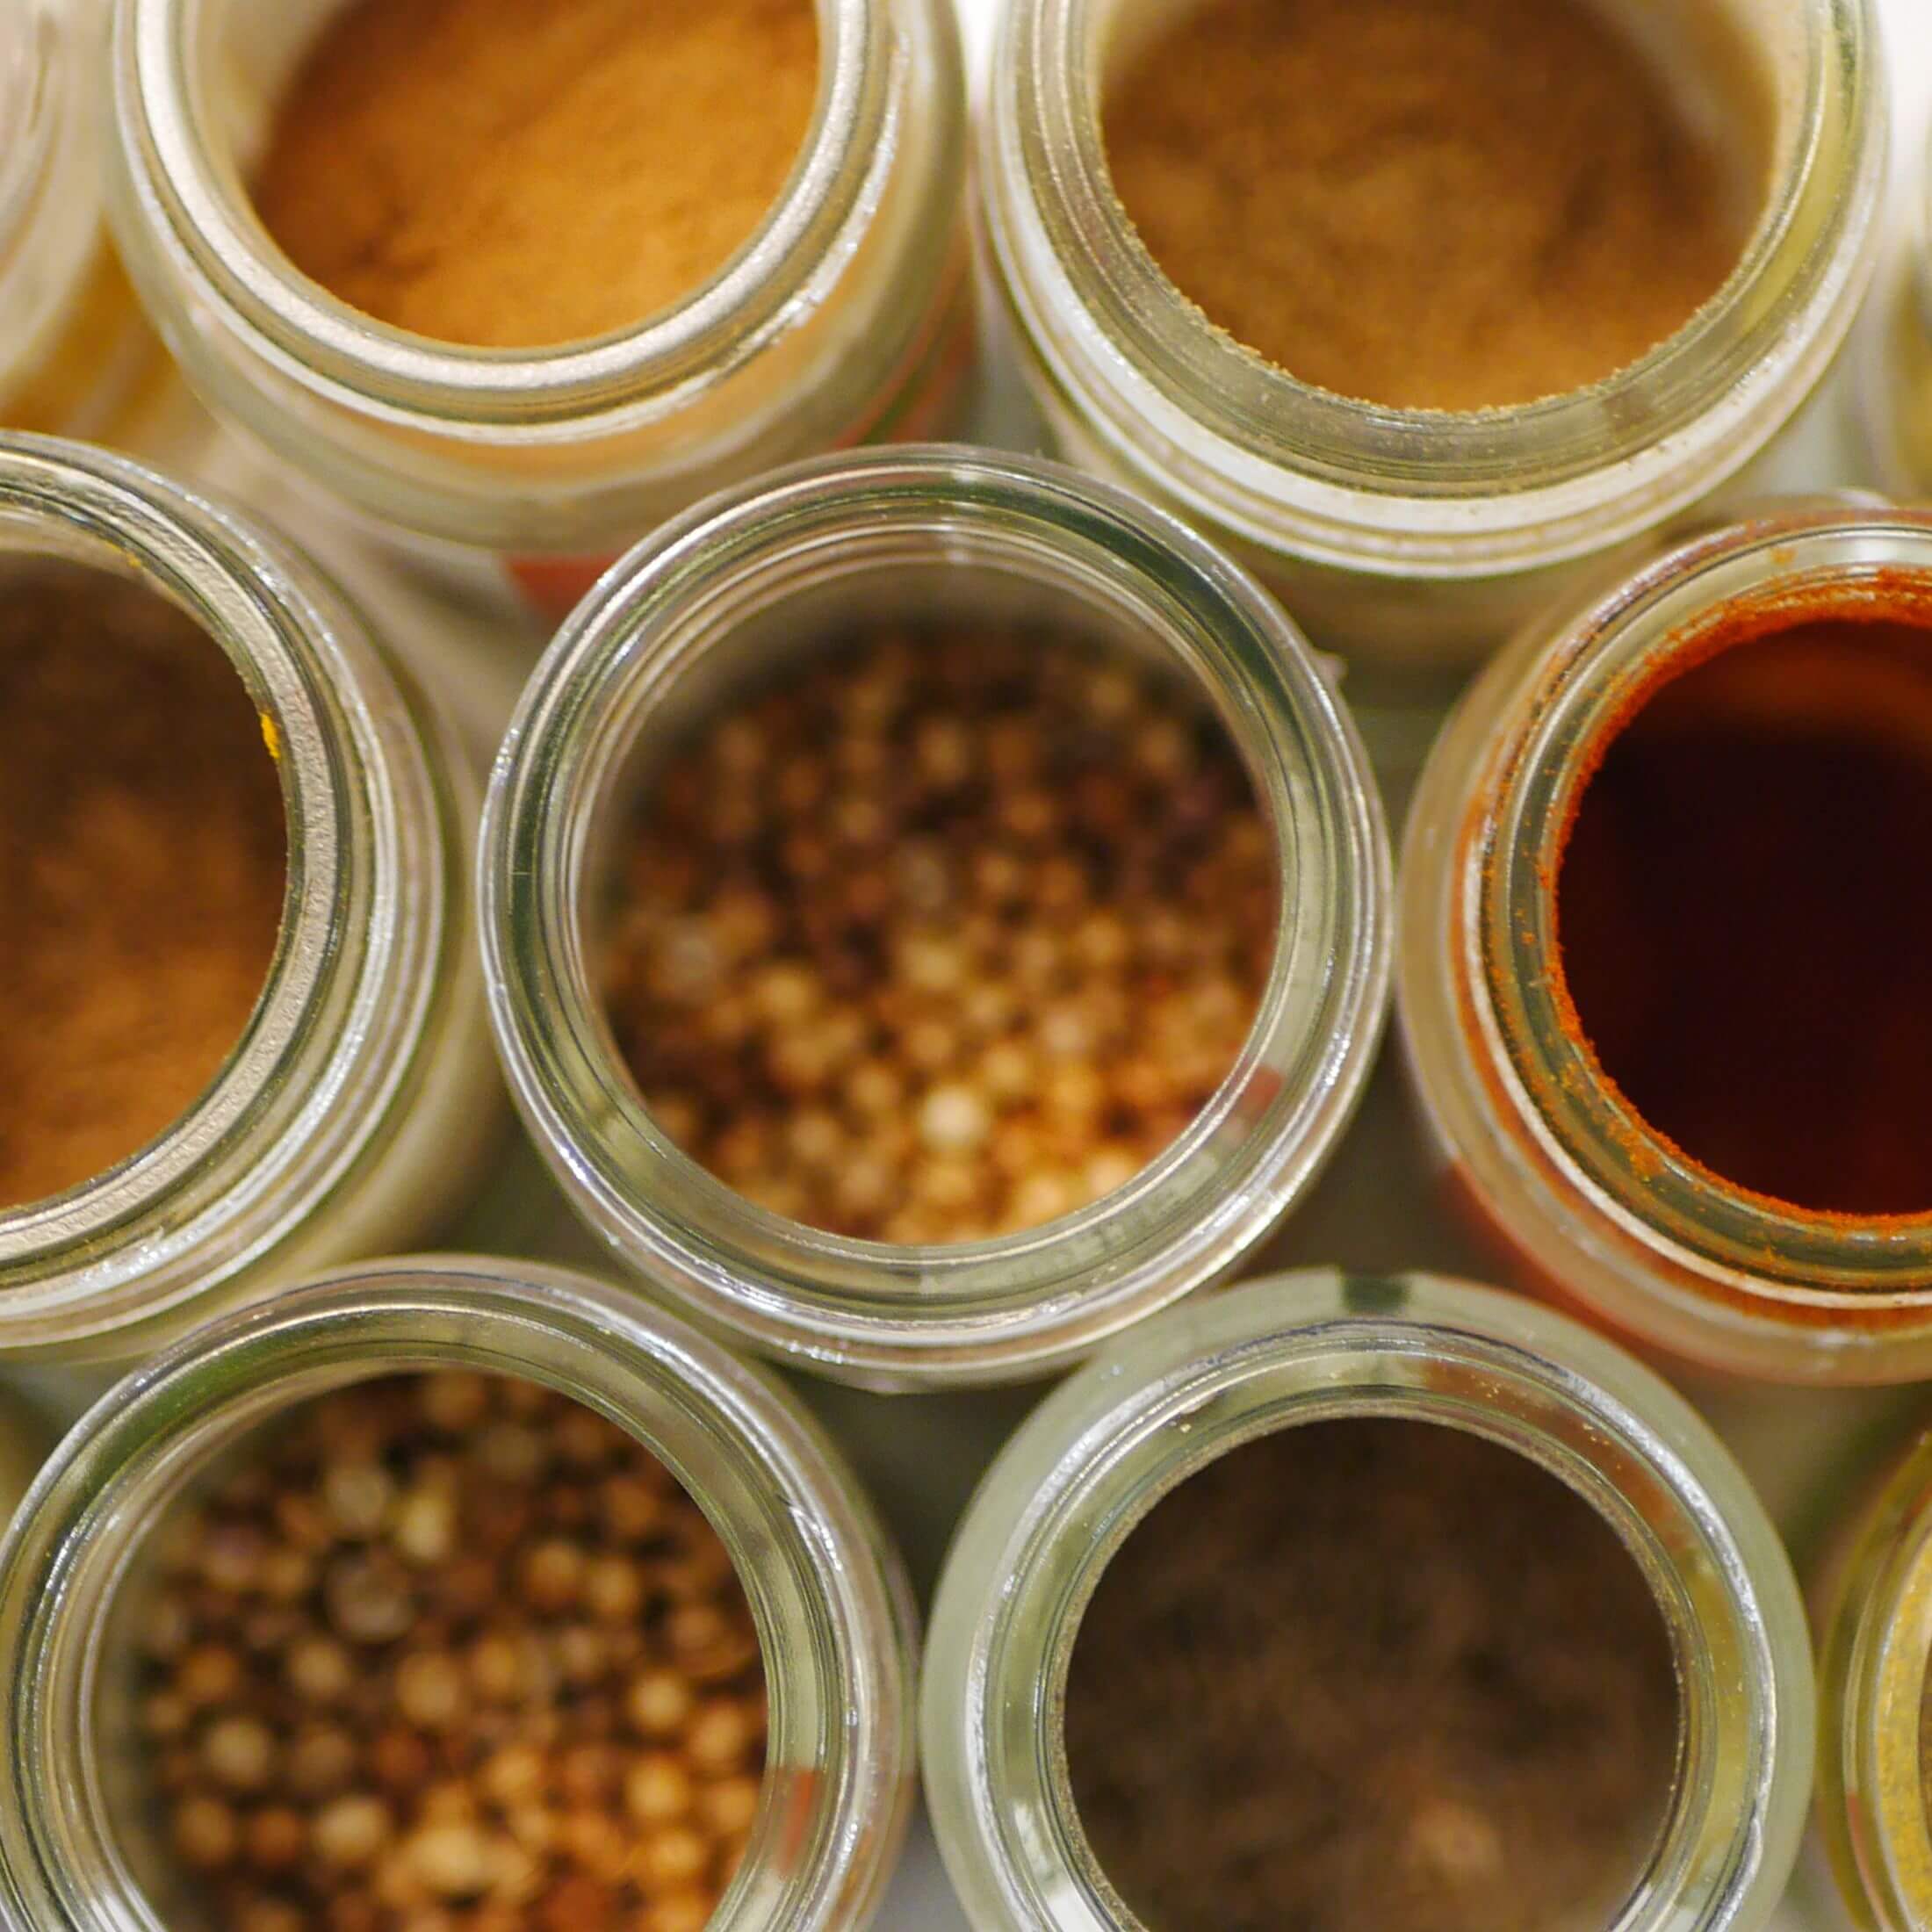 Caked Spices clumped inside jars